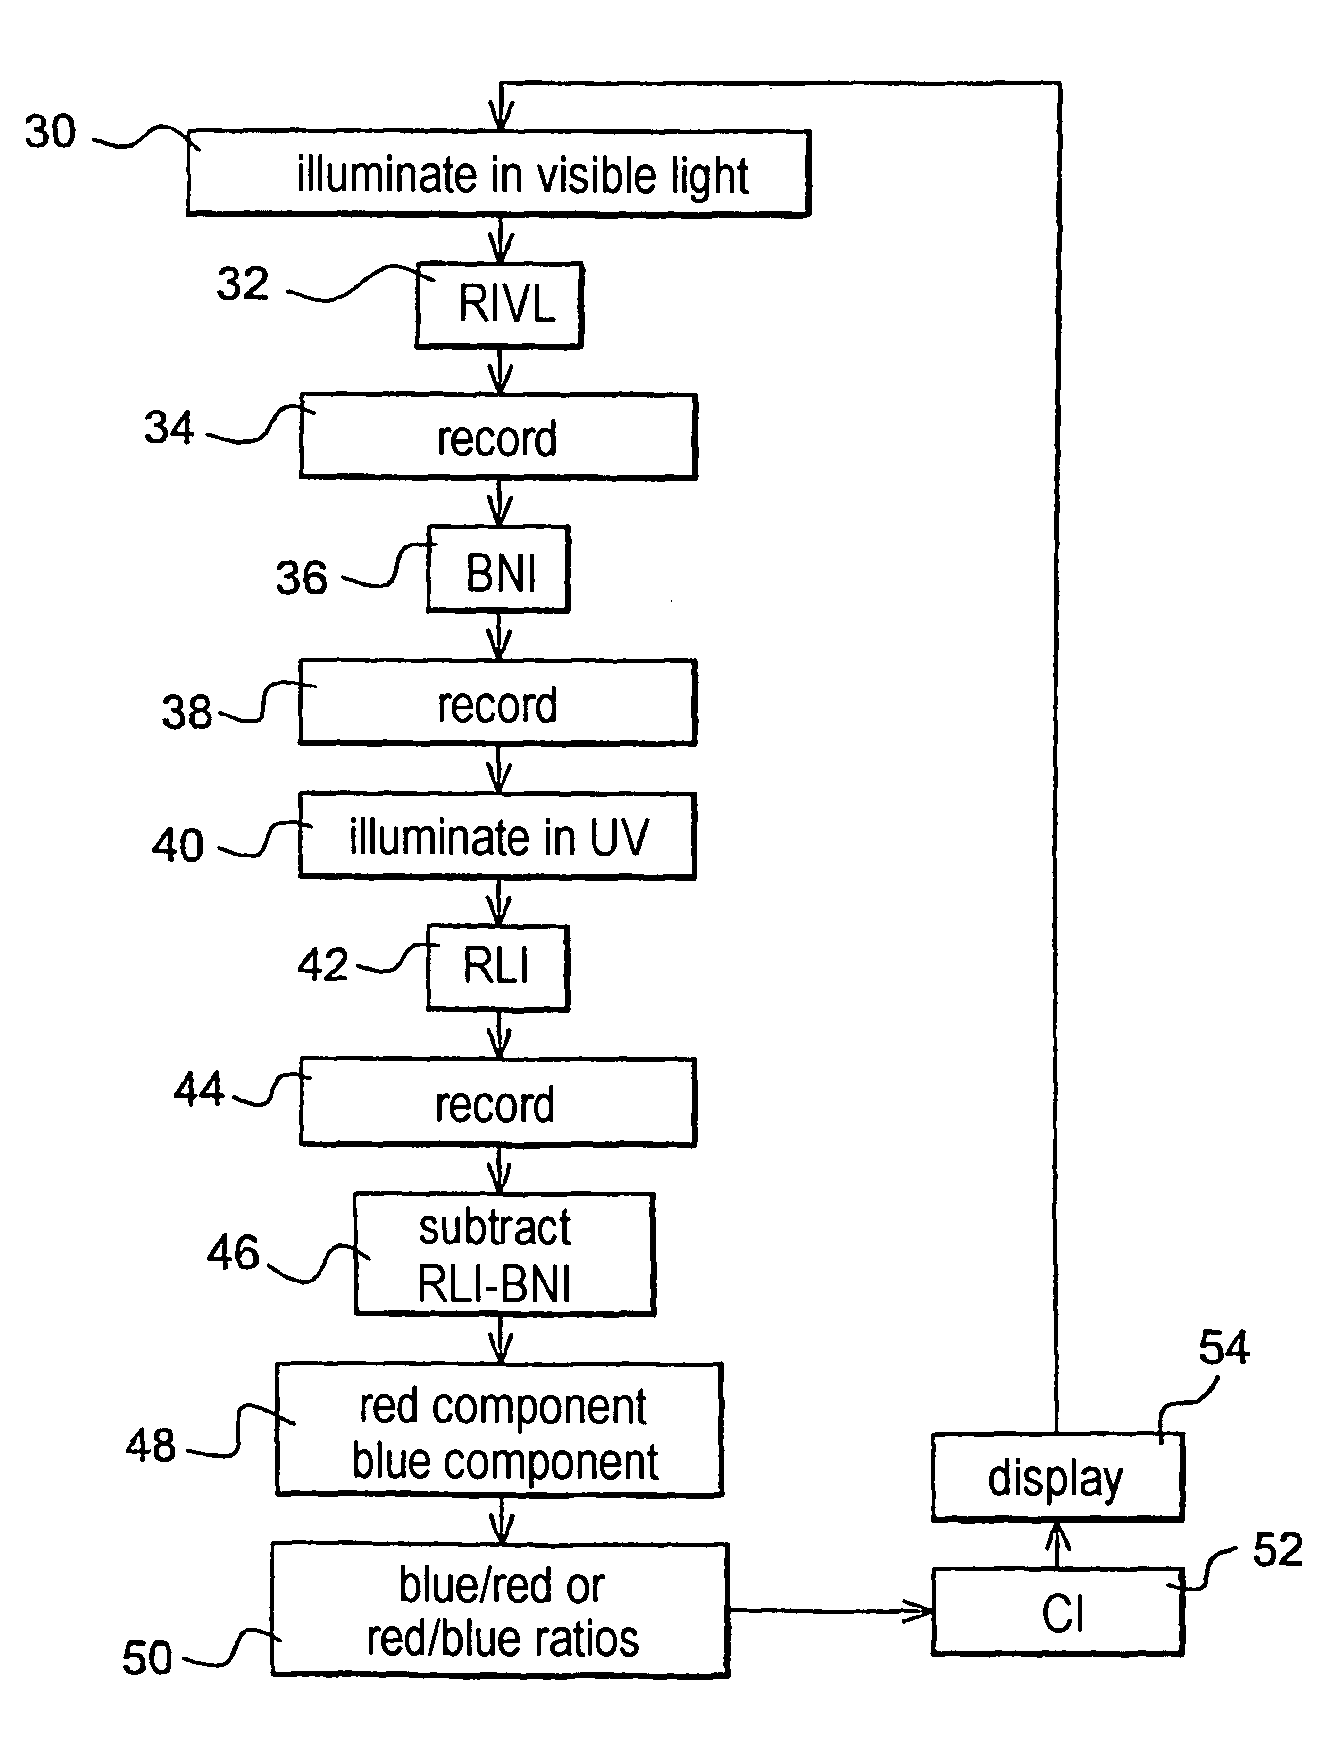 Method and apparatus for acquiring and processing images of an article such as a tooth